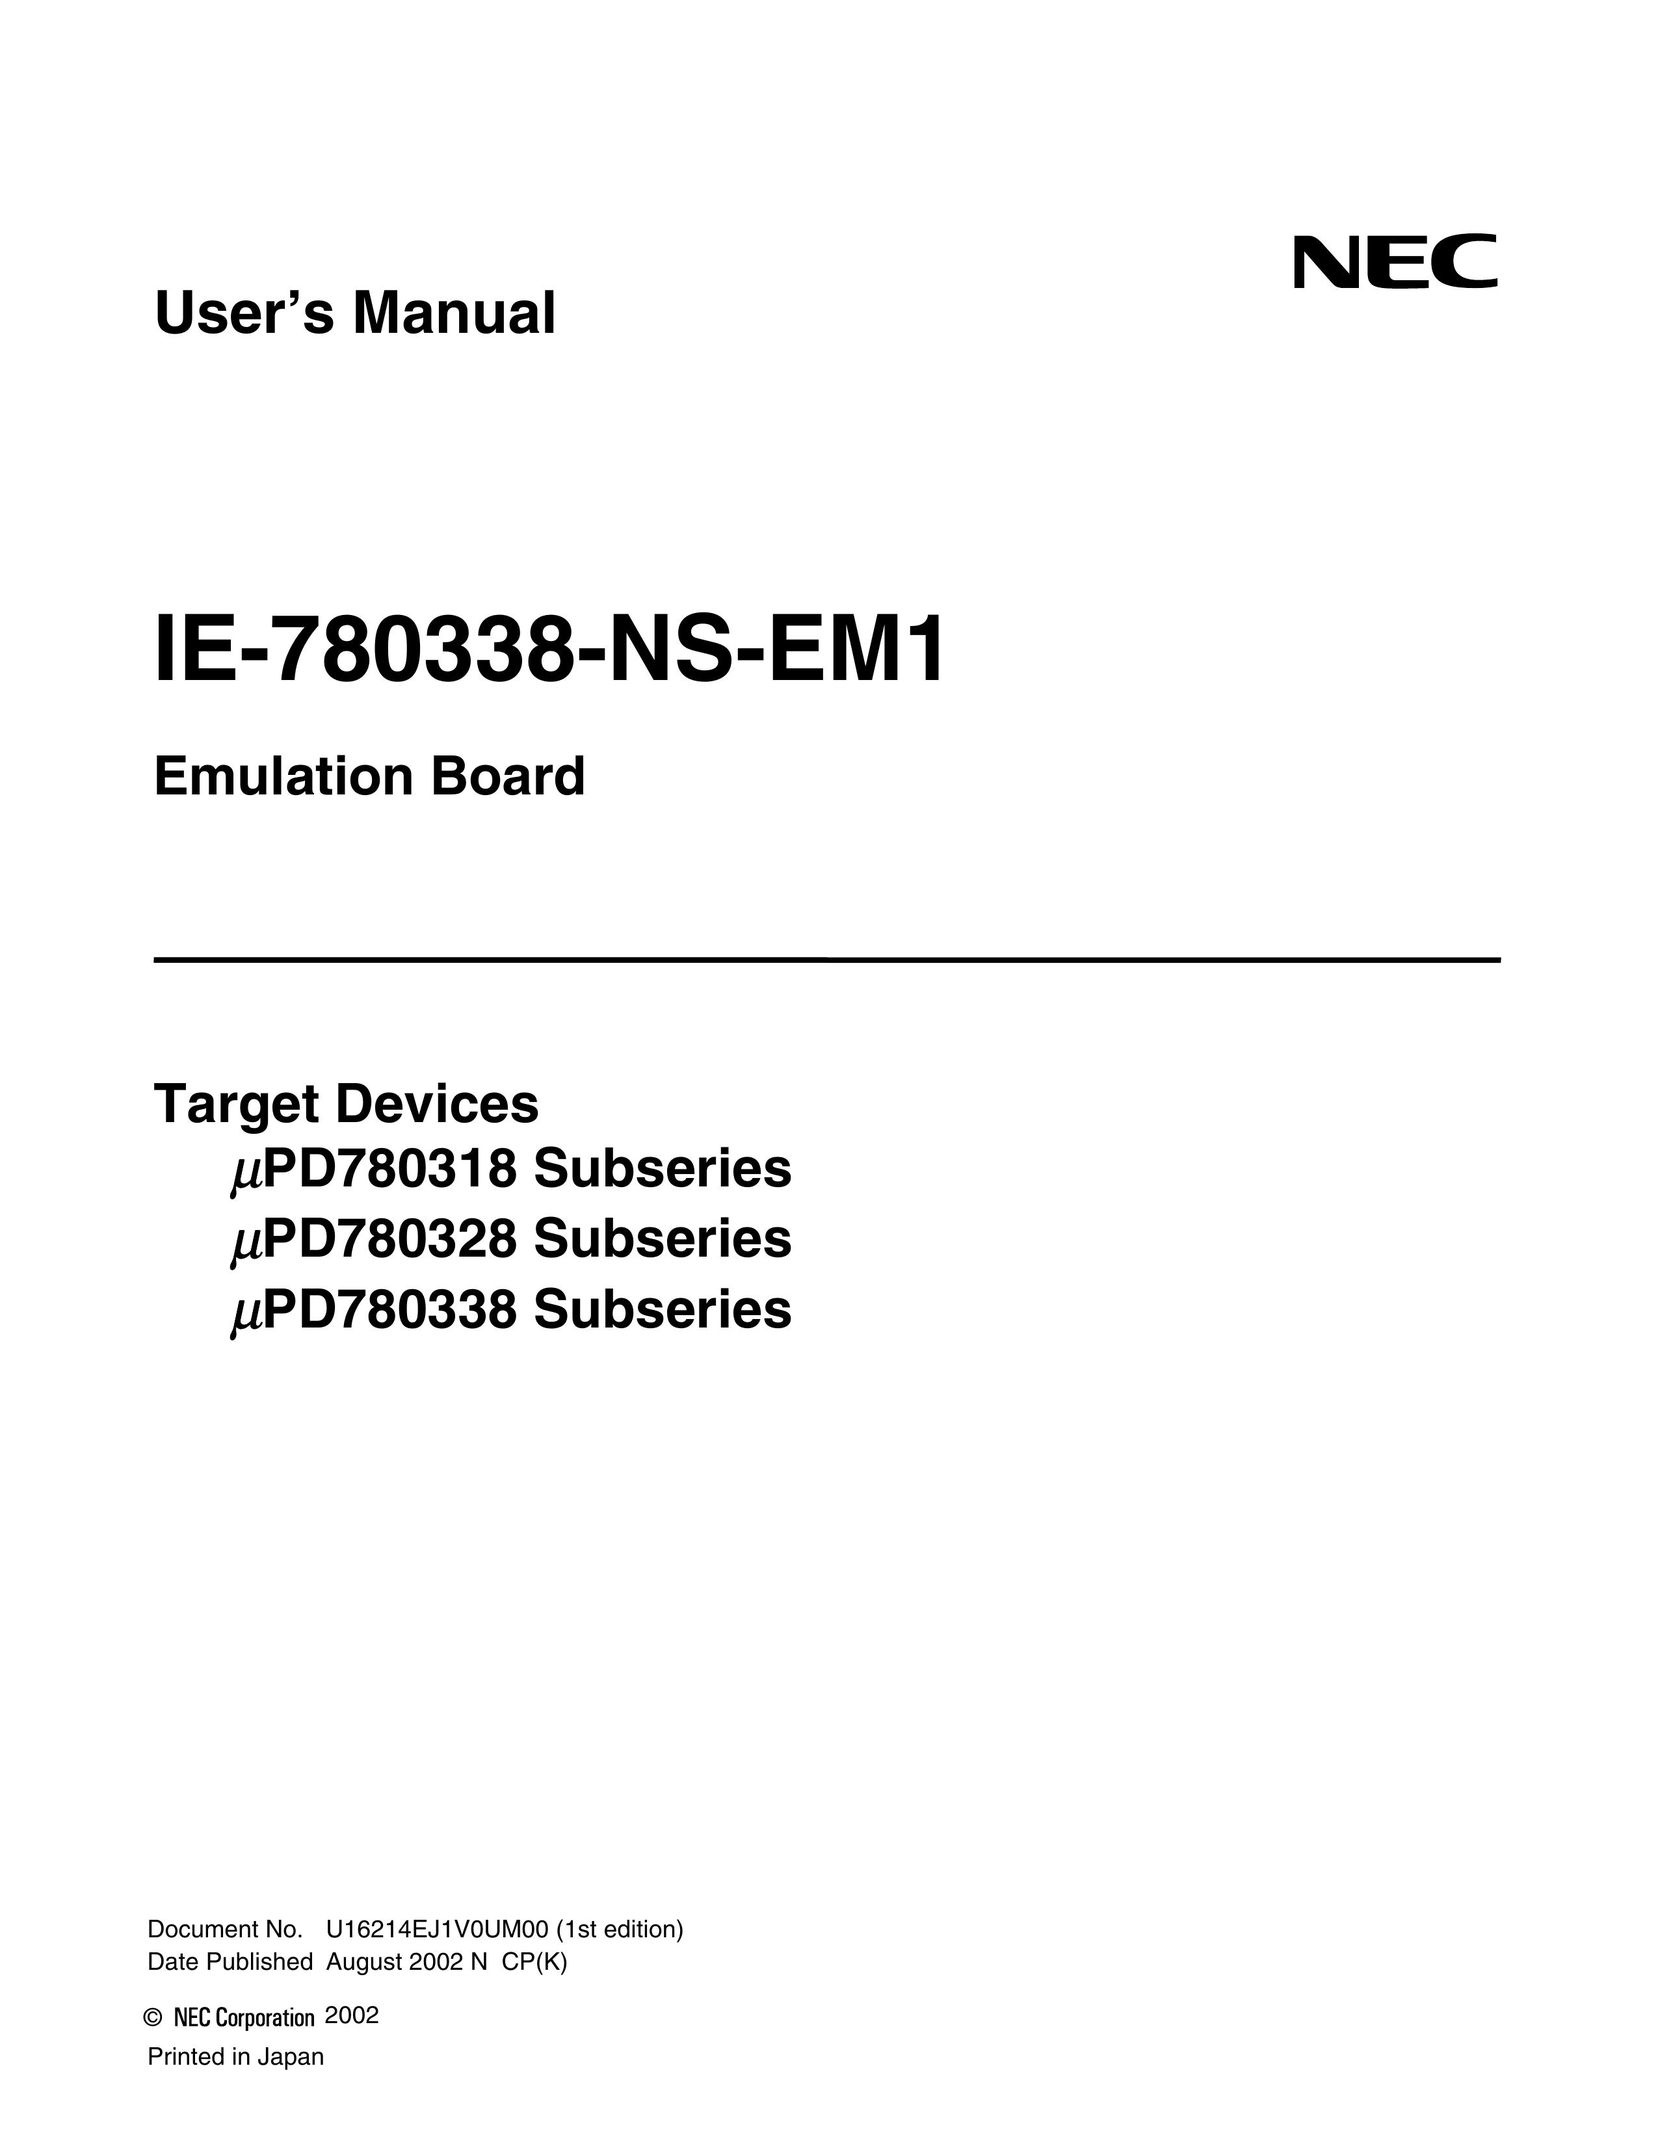 NEC uPD780328 Subseries Computer Hardware User Manual